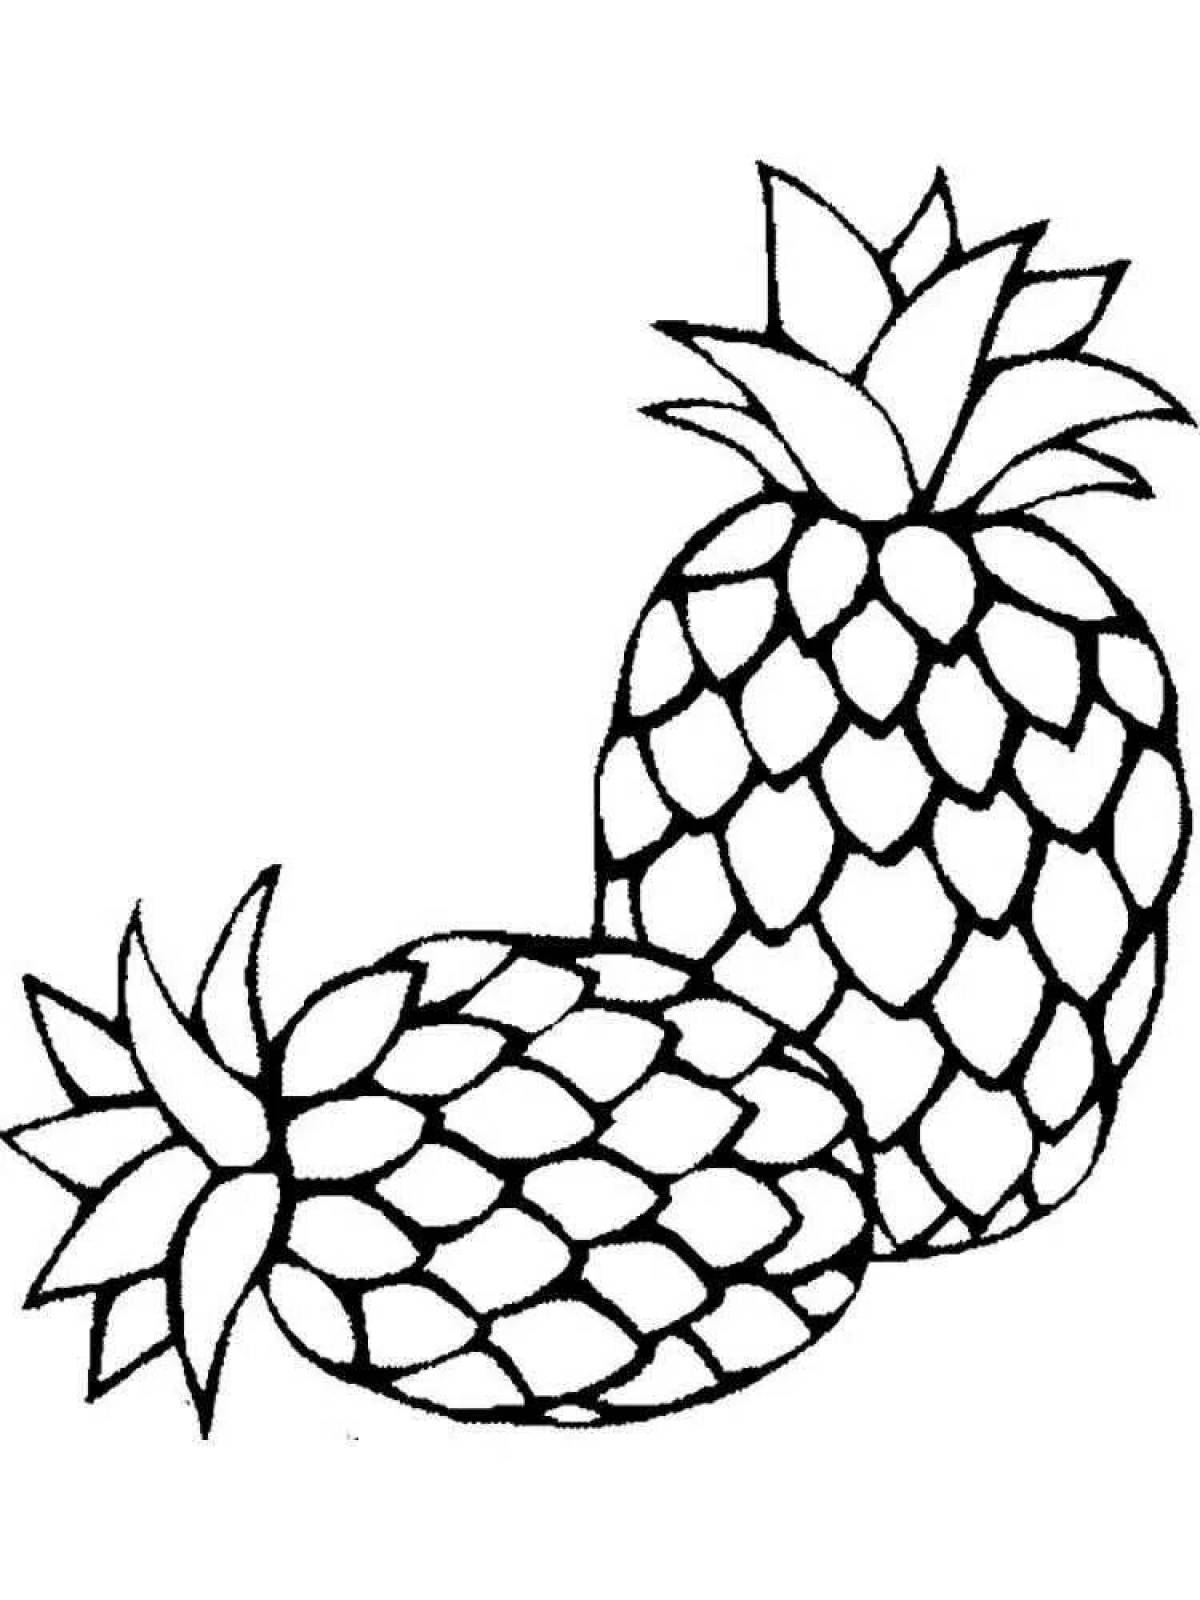 Colored pineapple coloring page for kids